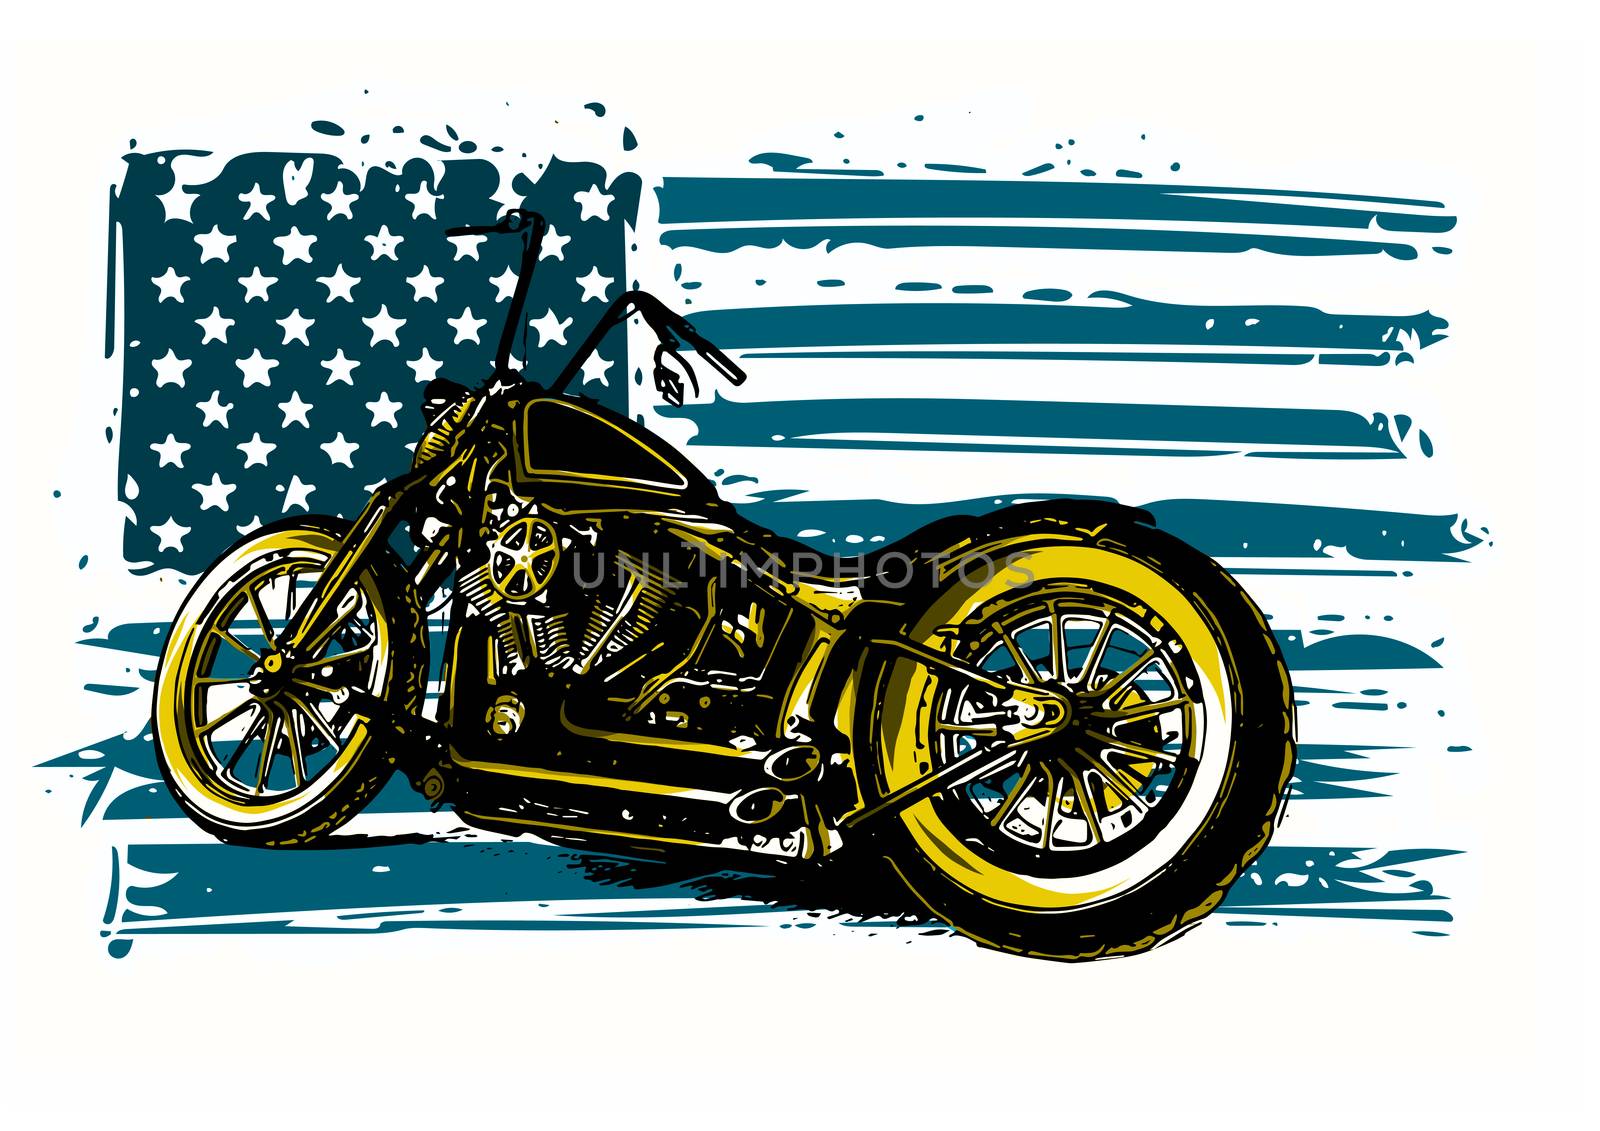 Hand drawn and inked vintage American chopper motorcycle with american flag by dean